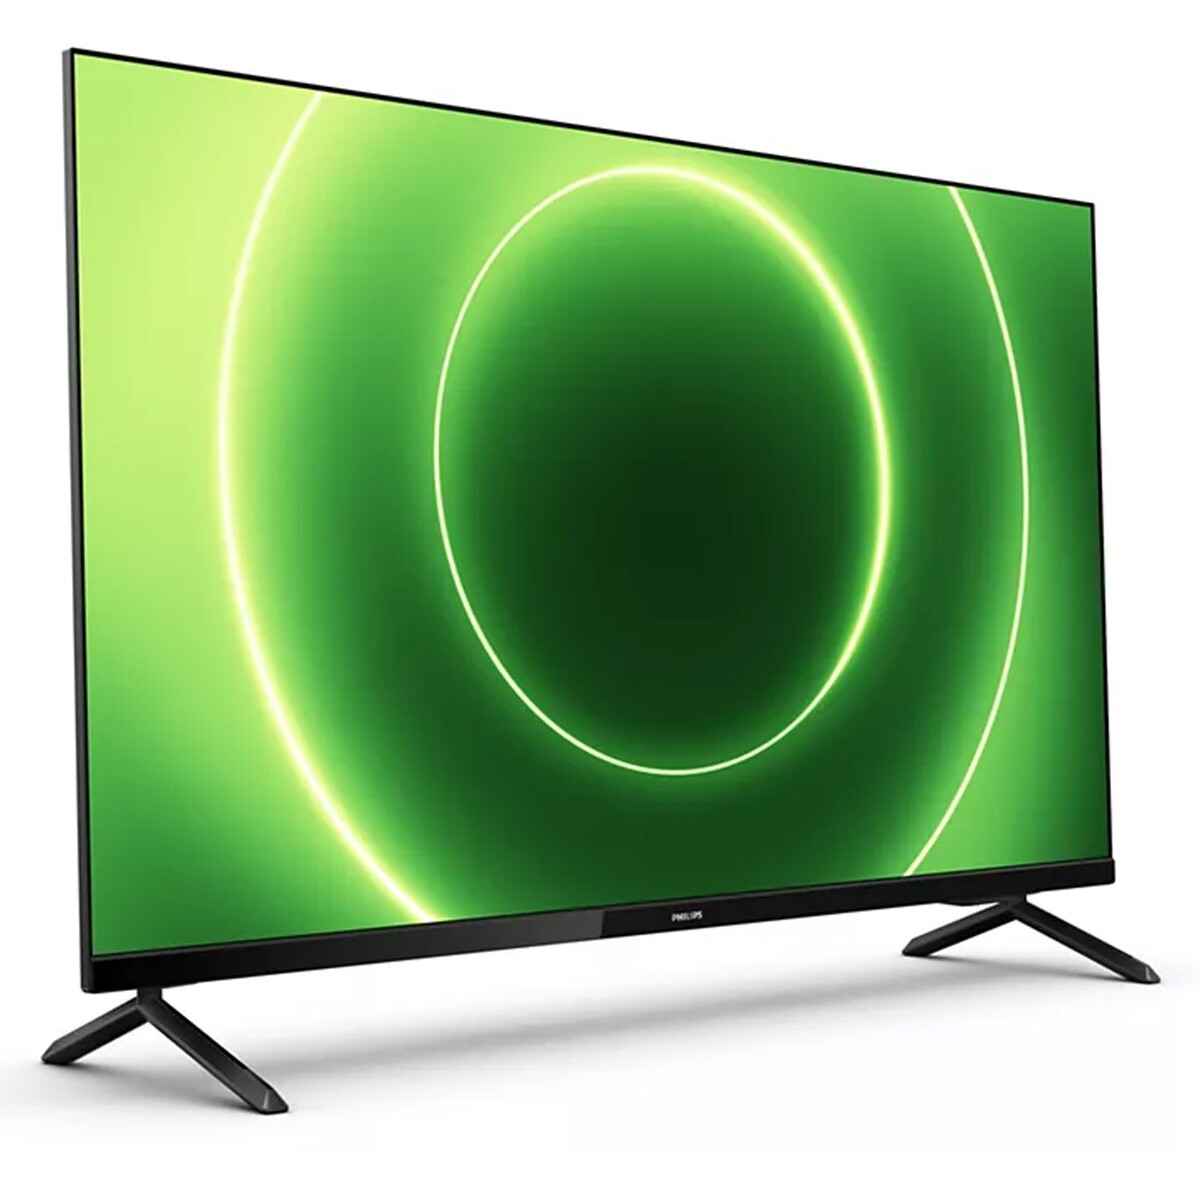 Philips HD Android Smart LED TV 32PHT6915 32"